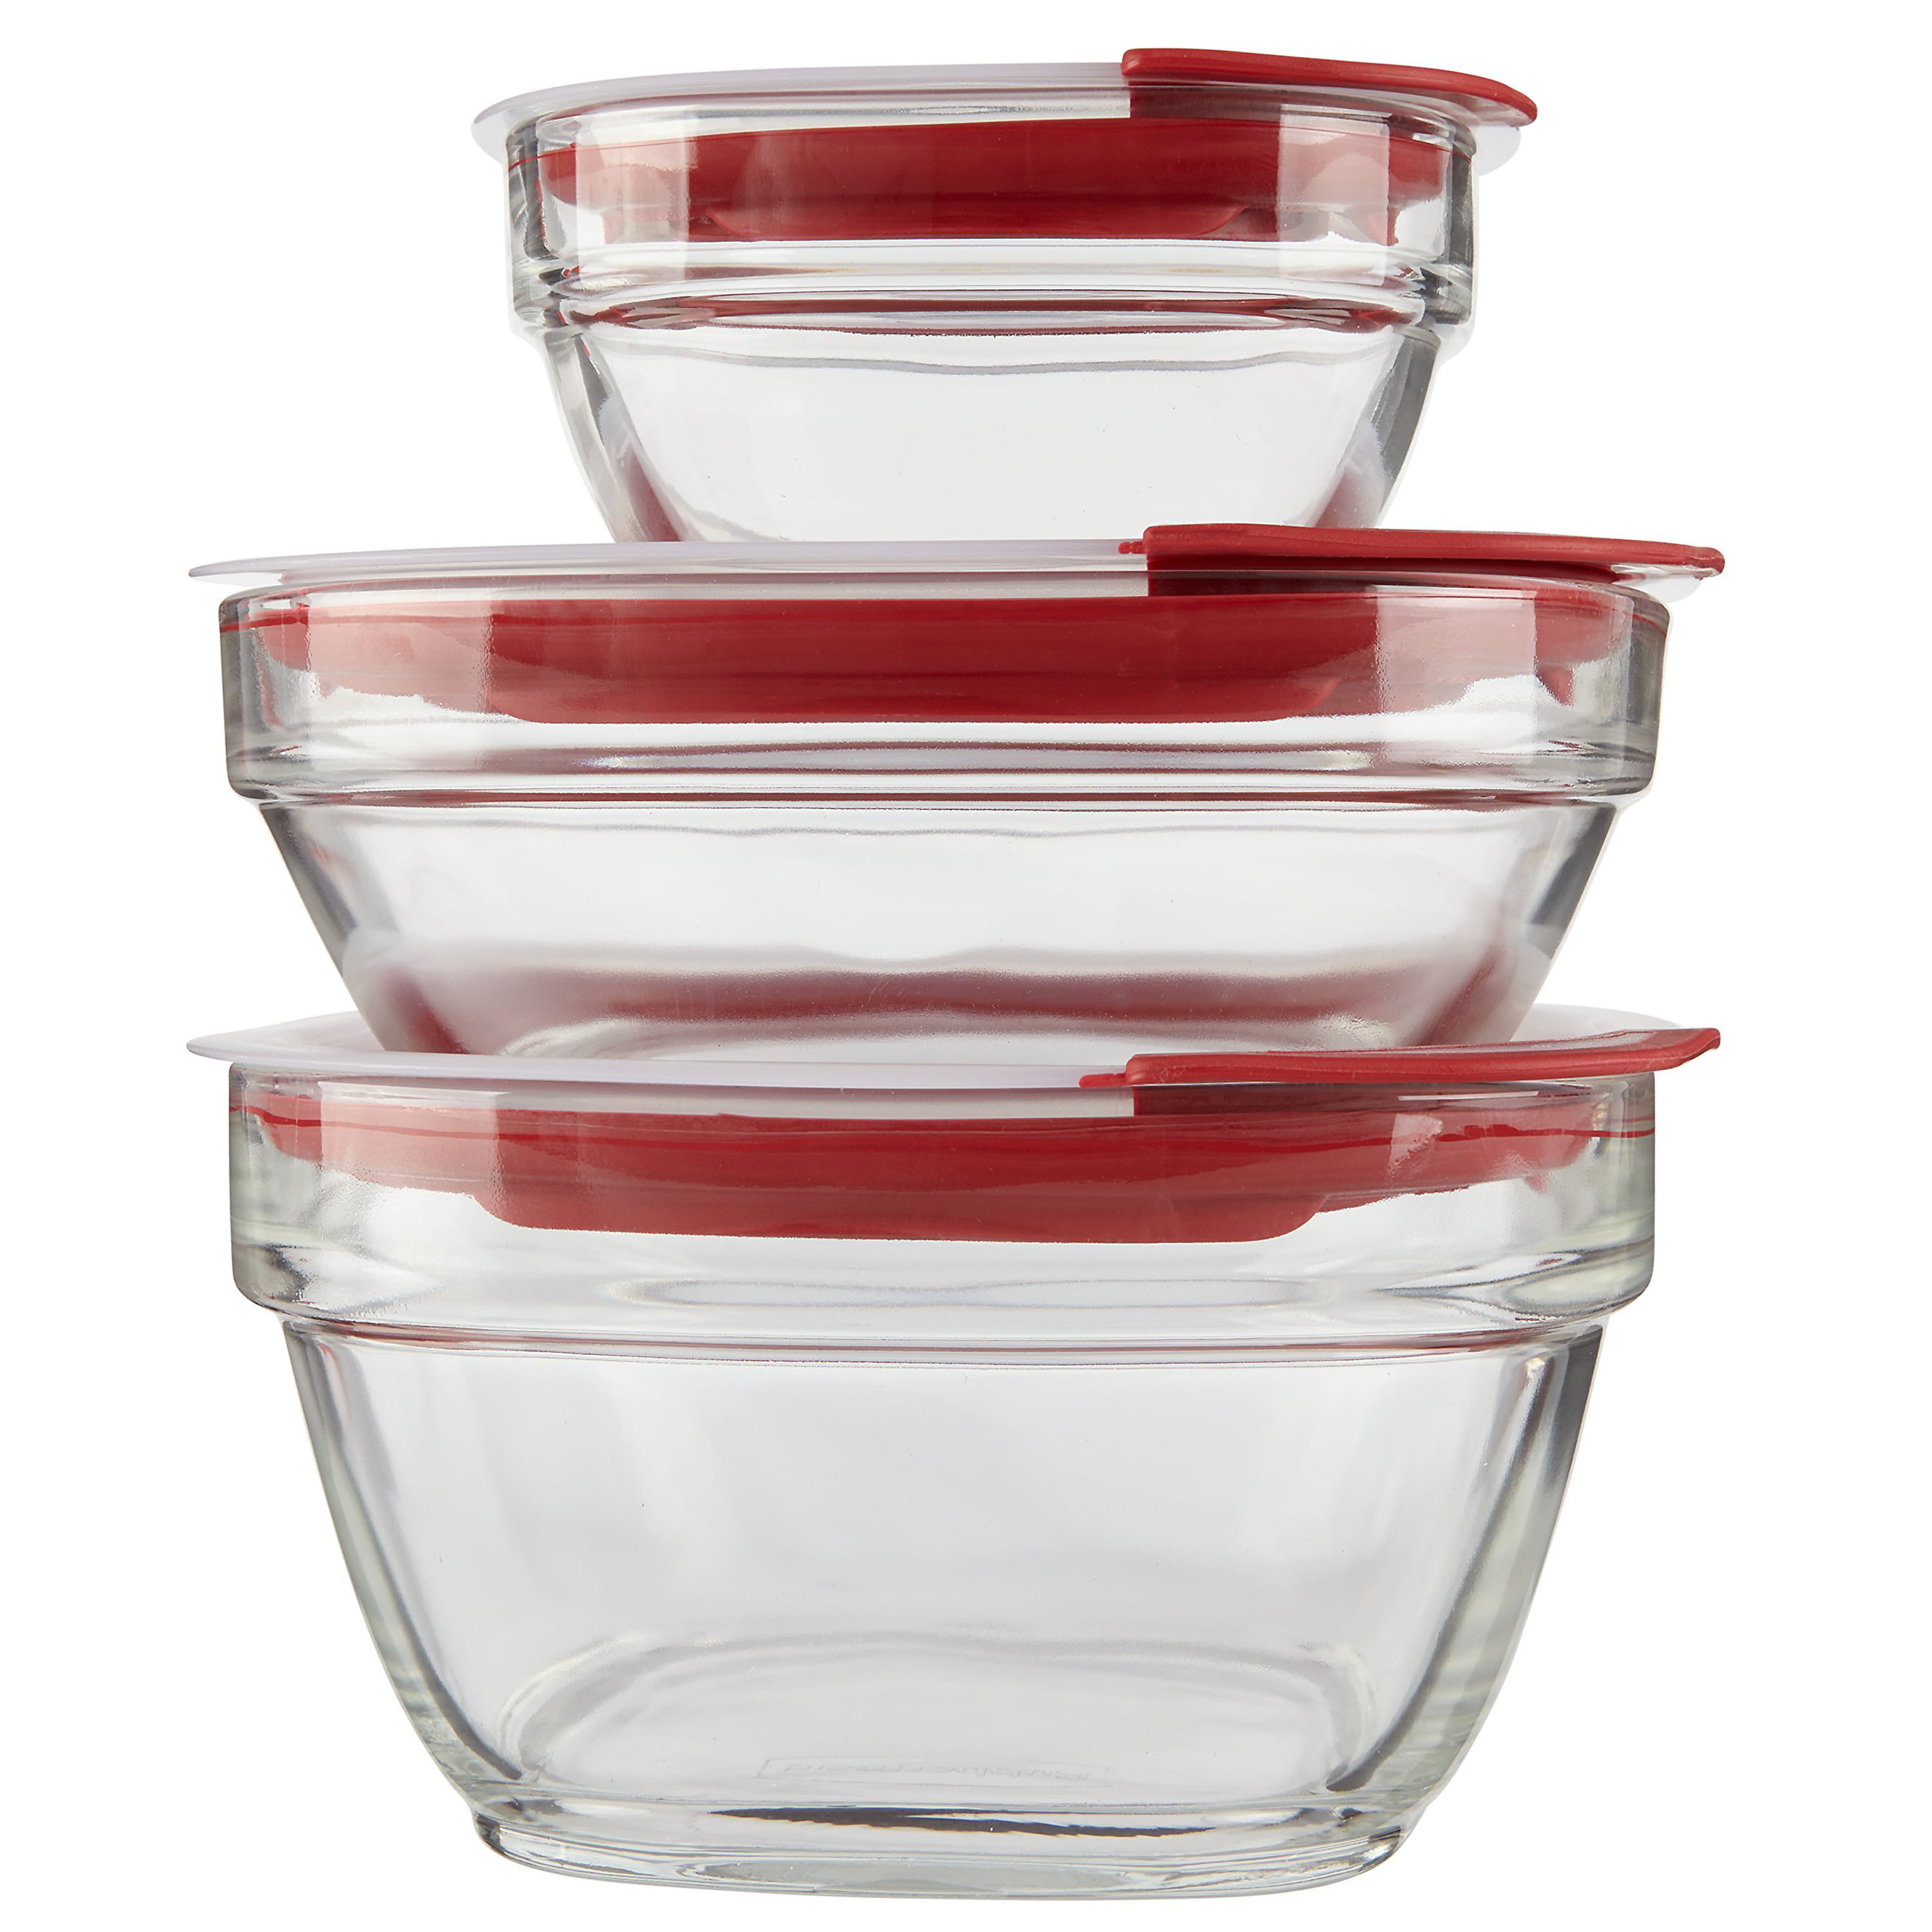 Save on Rubbermaid Easy Find Lids Container & Lid Extra Clear 3